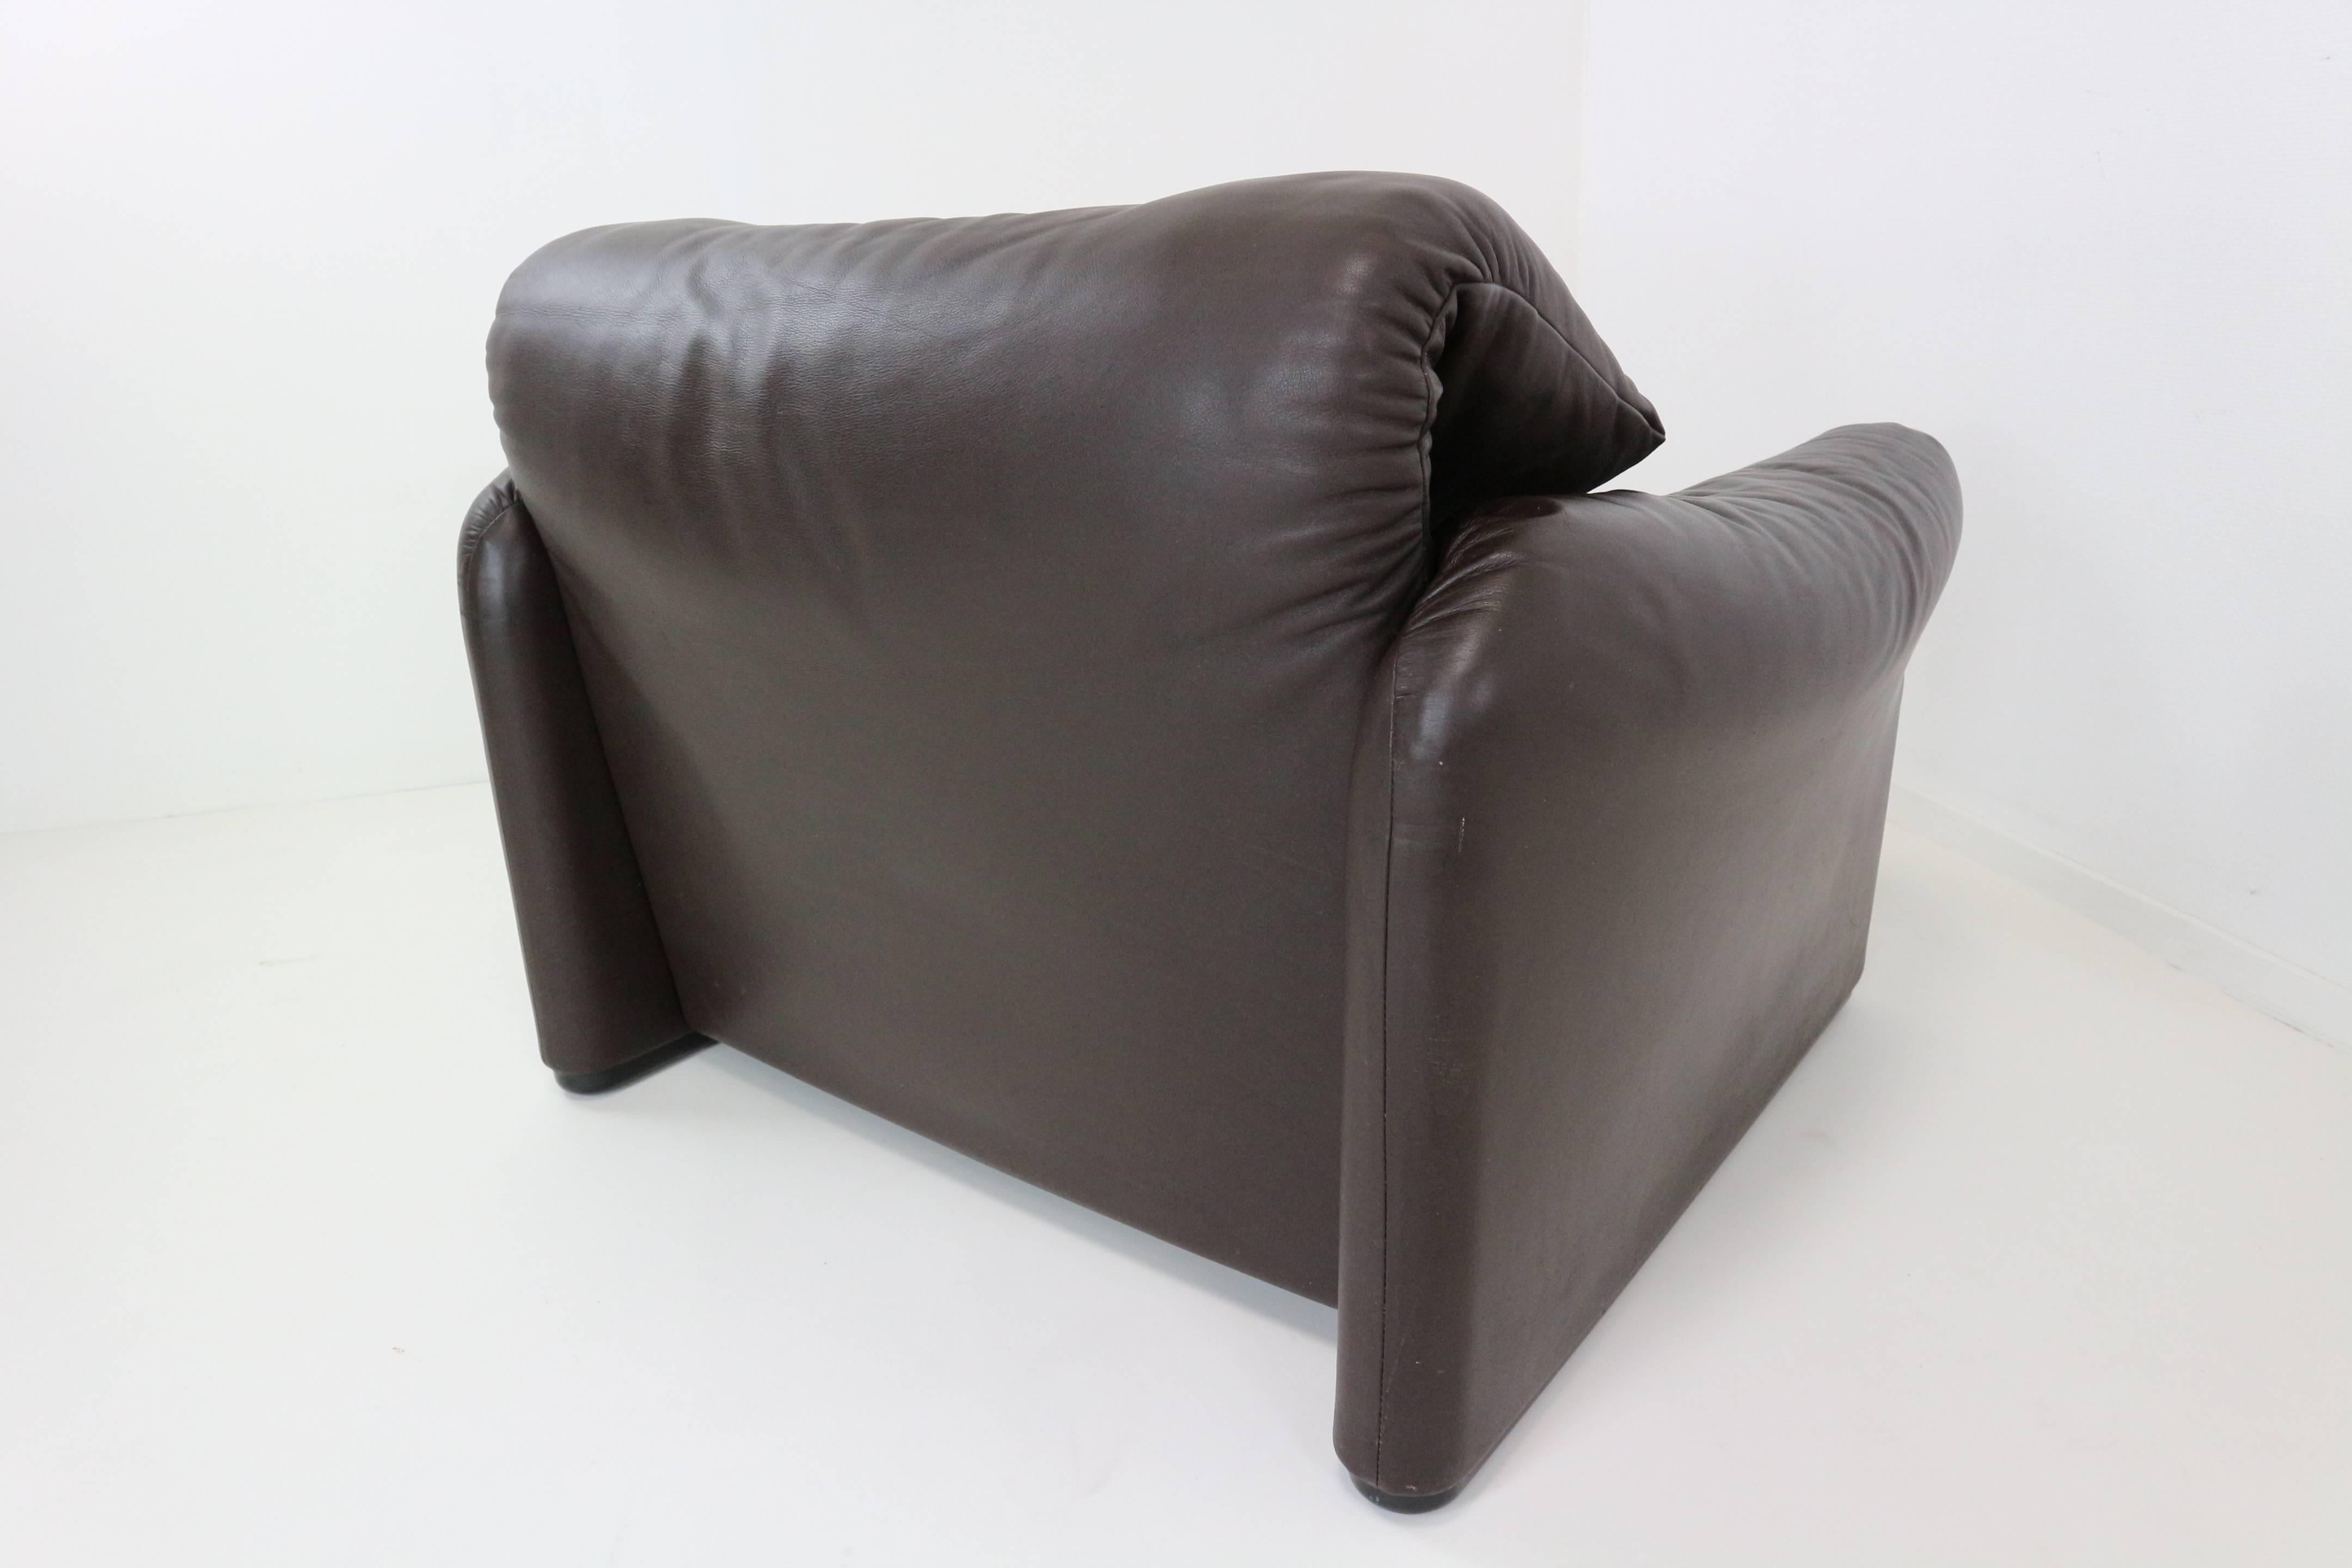 Adjustable lounge chair in real dark brown leather. Choose between a high or low back height and fold the arms to desired width. Also available as a set, we have two lounge chairs in stock.

We ship worldwide, do not hesitate to contact us. We